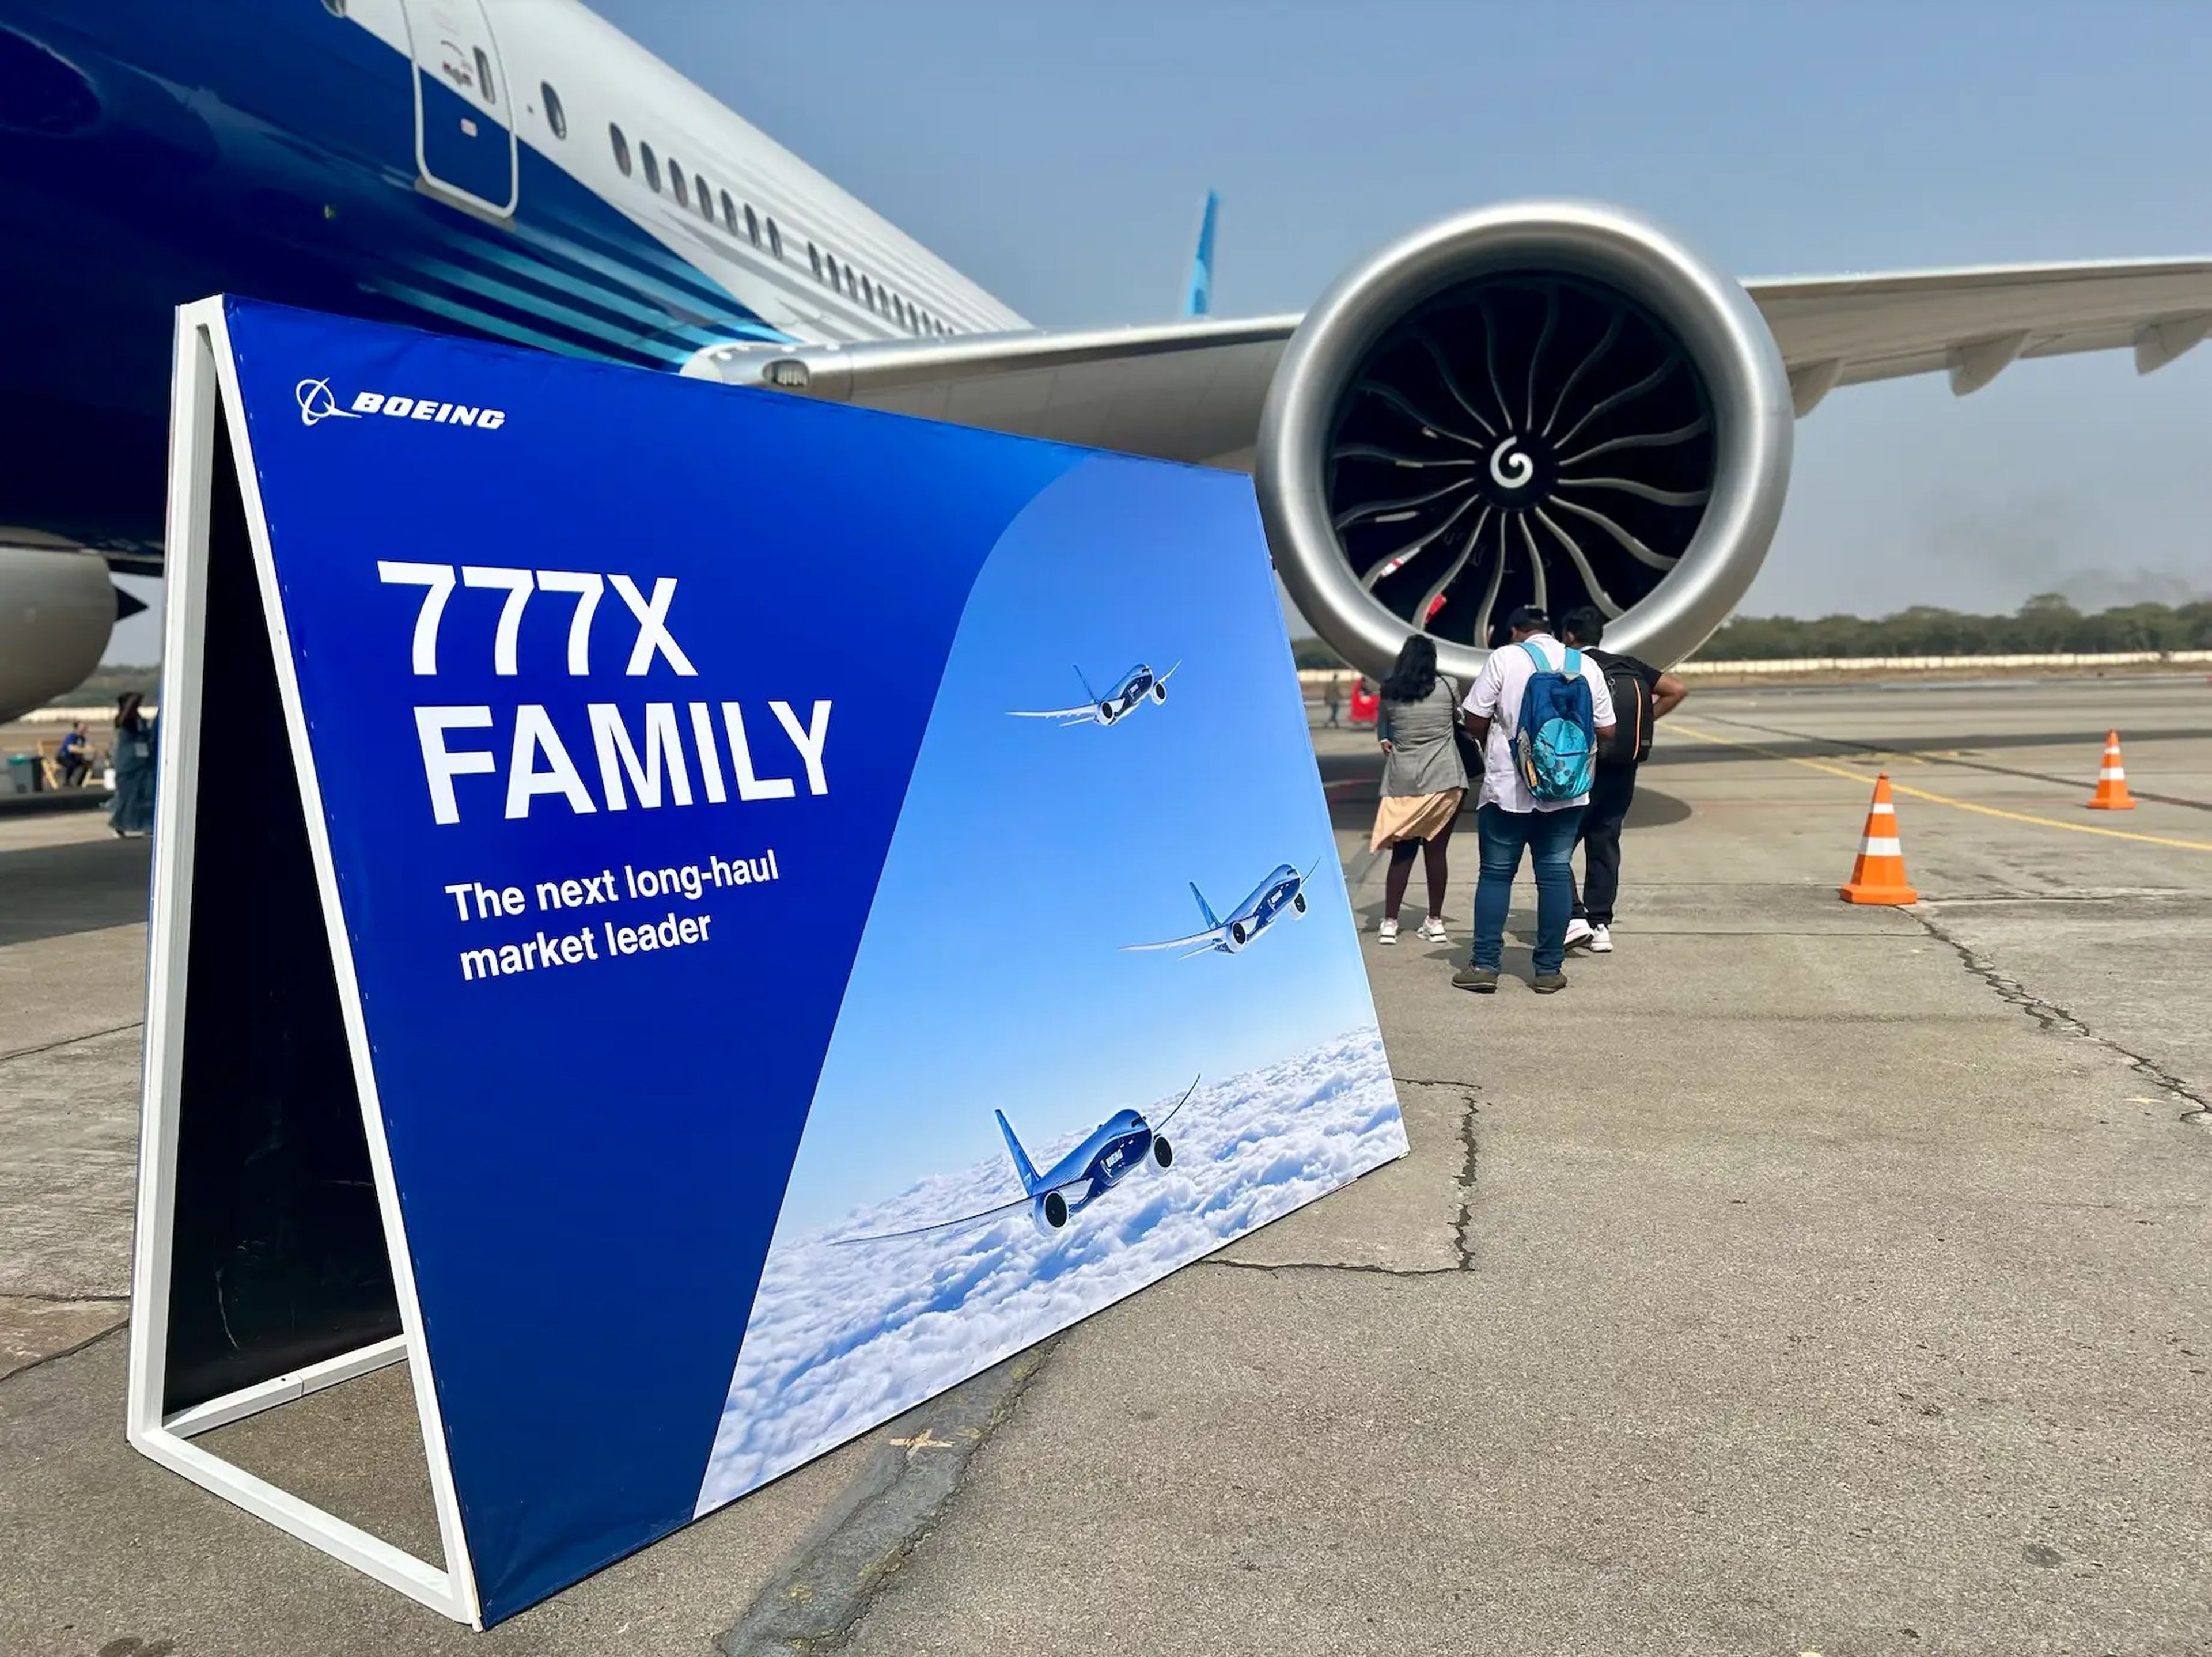 The Boeing 777X family has three variants: the 777-8, the 777-9, and the 777F freighter.